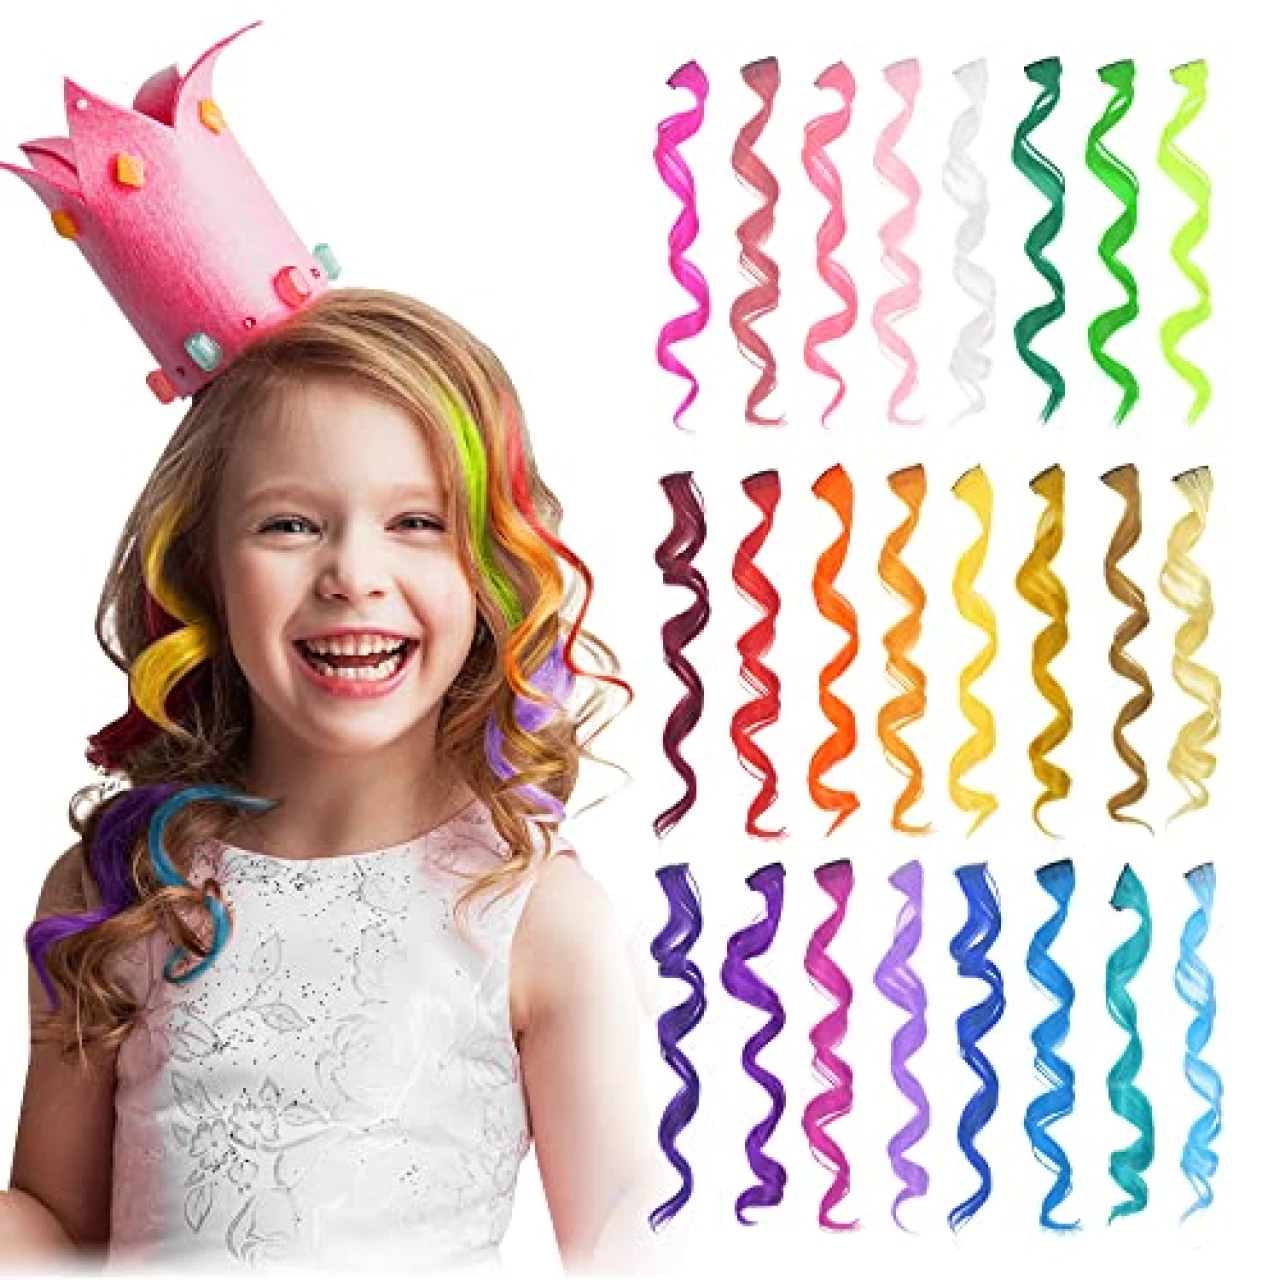 Dreamlover Halloween Hair Accessories for Girls, Colored Hair Extensions for Kids, Crazy Hair Day Accessories, 24 Pieces